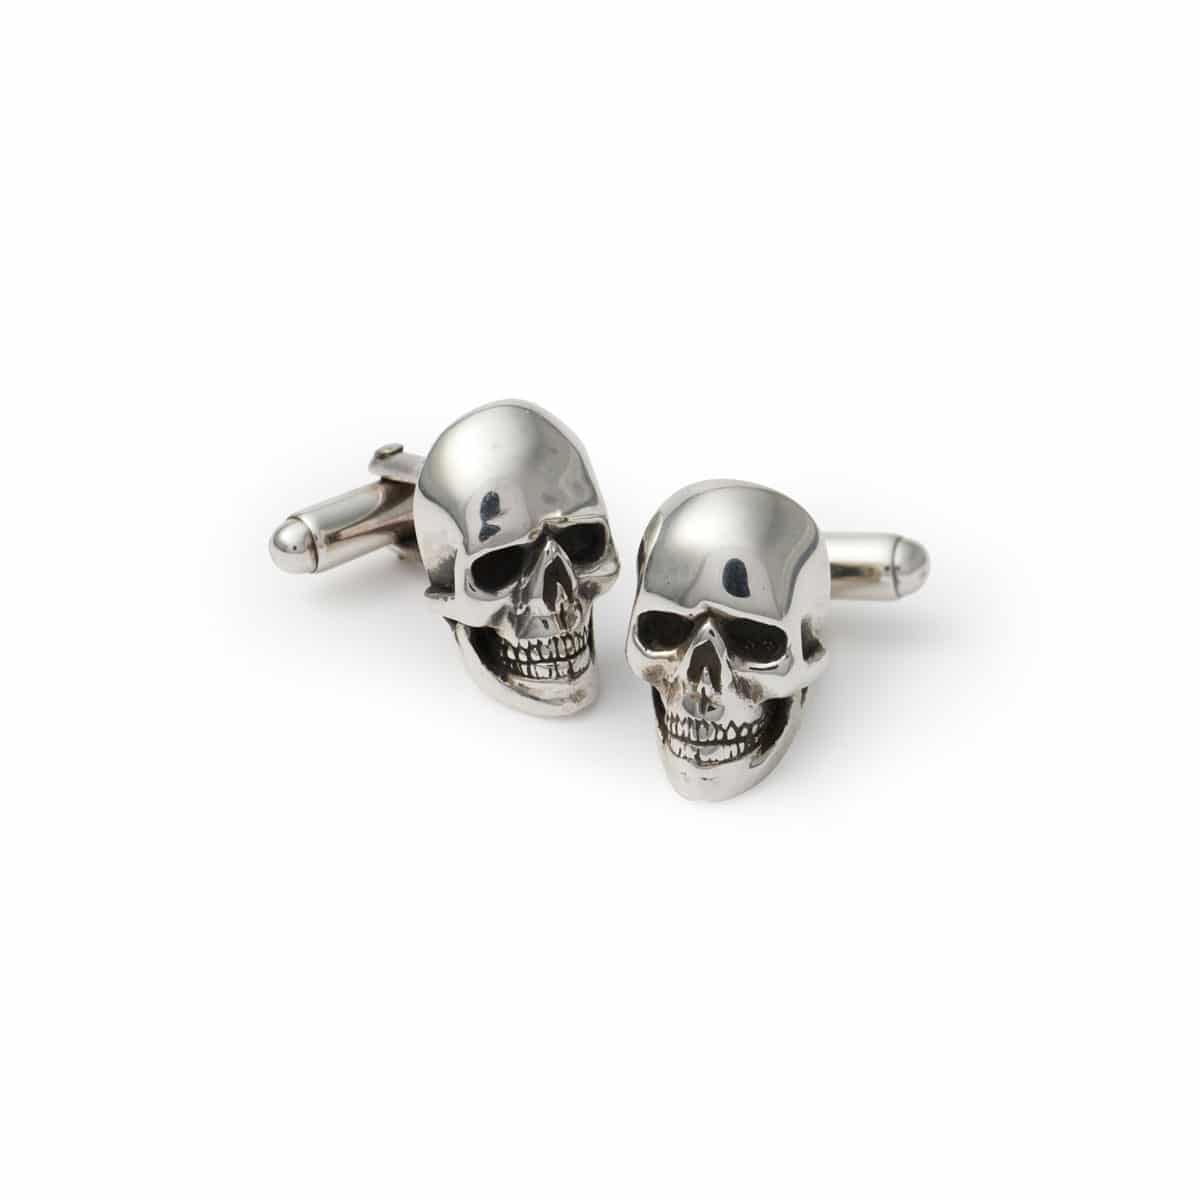 Anatomical Skull Cufflinks – The Great Frog